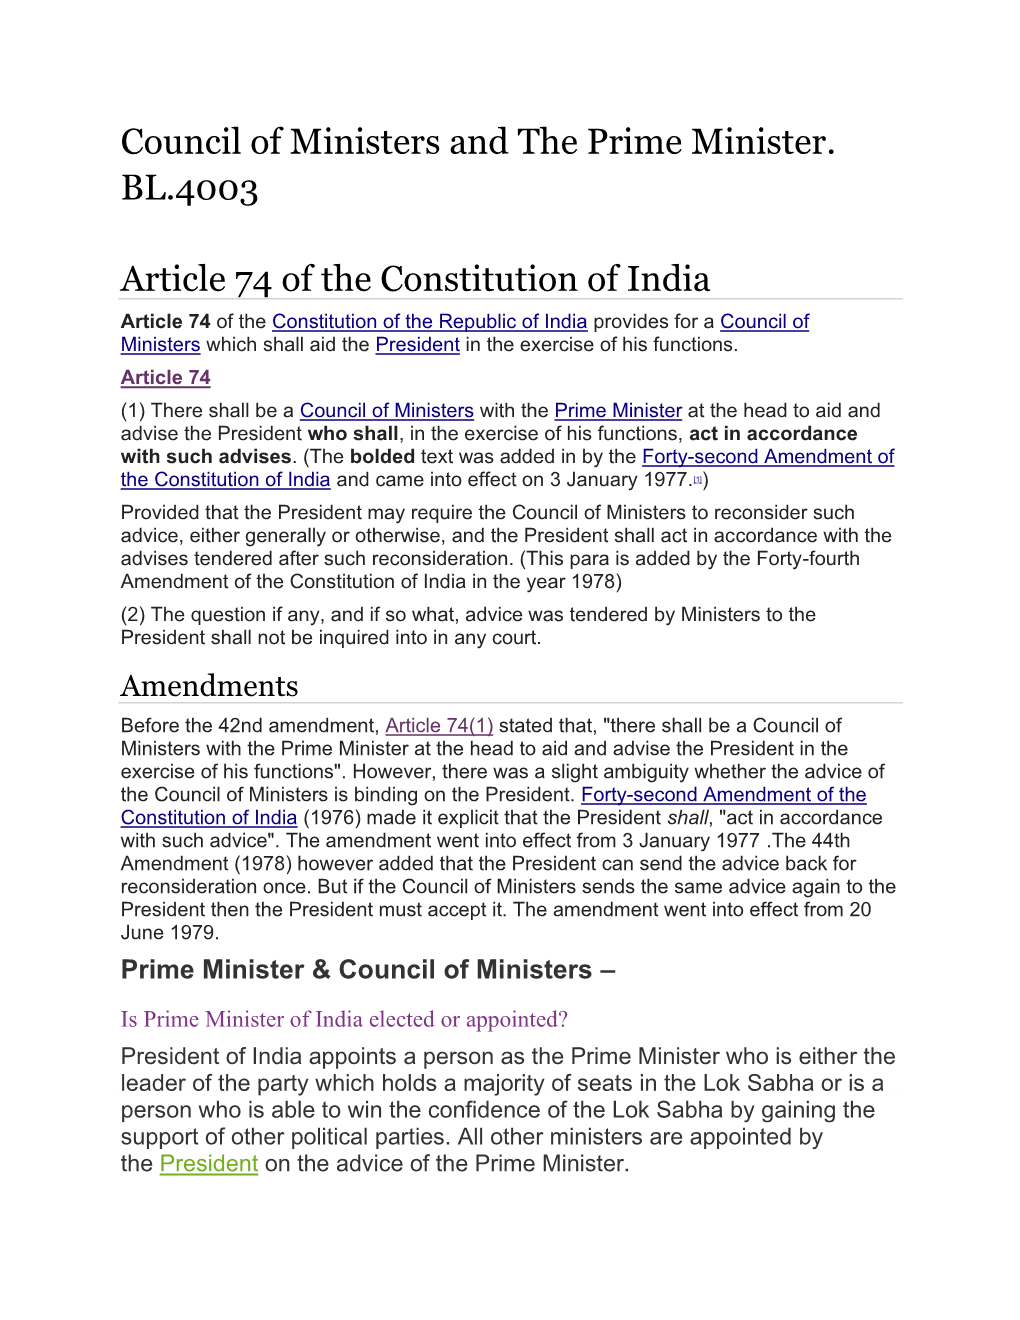 Council of Ministers and the Prime Minister. BL.4003 Article 74 of The